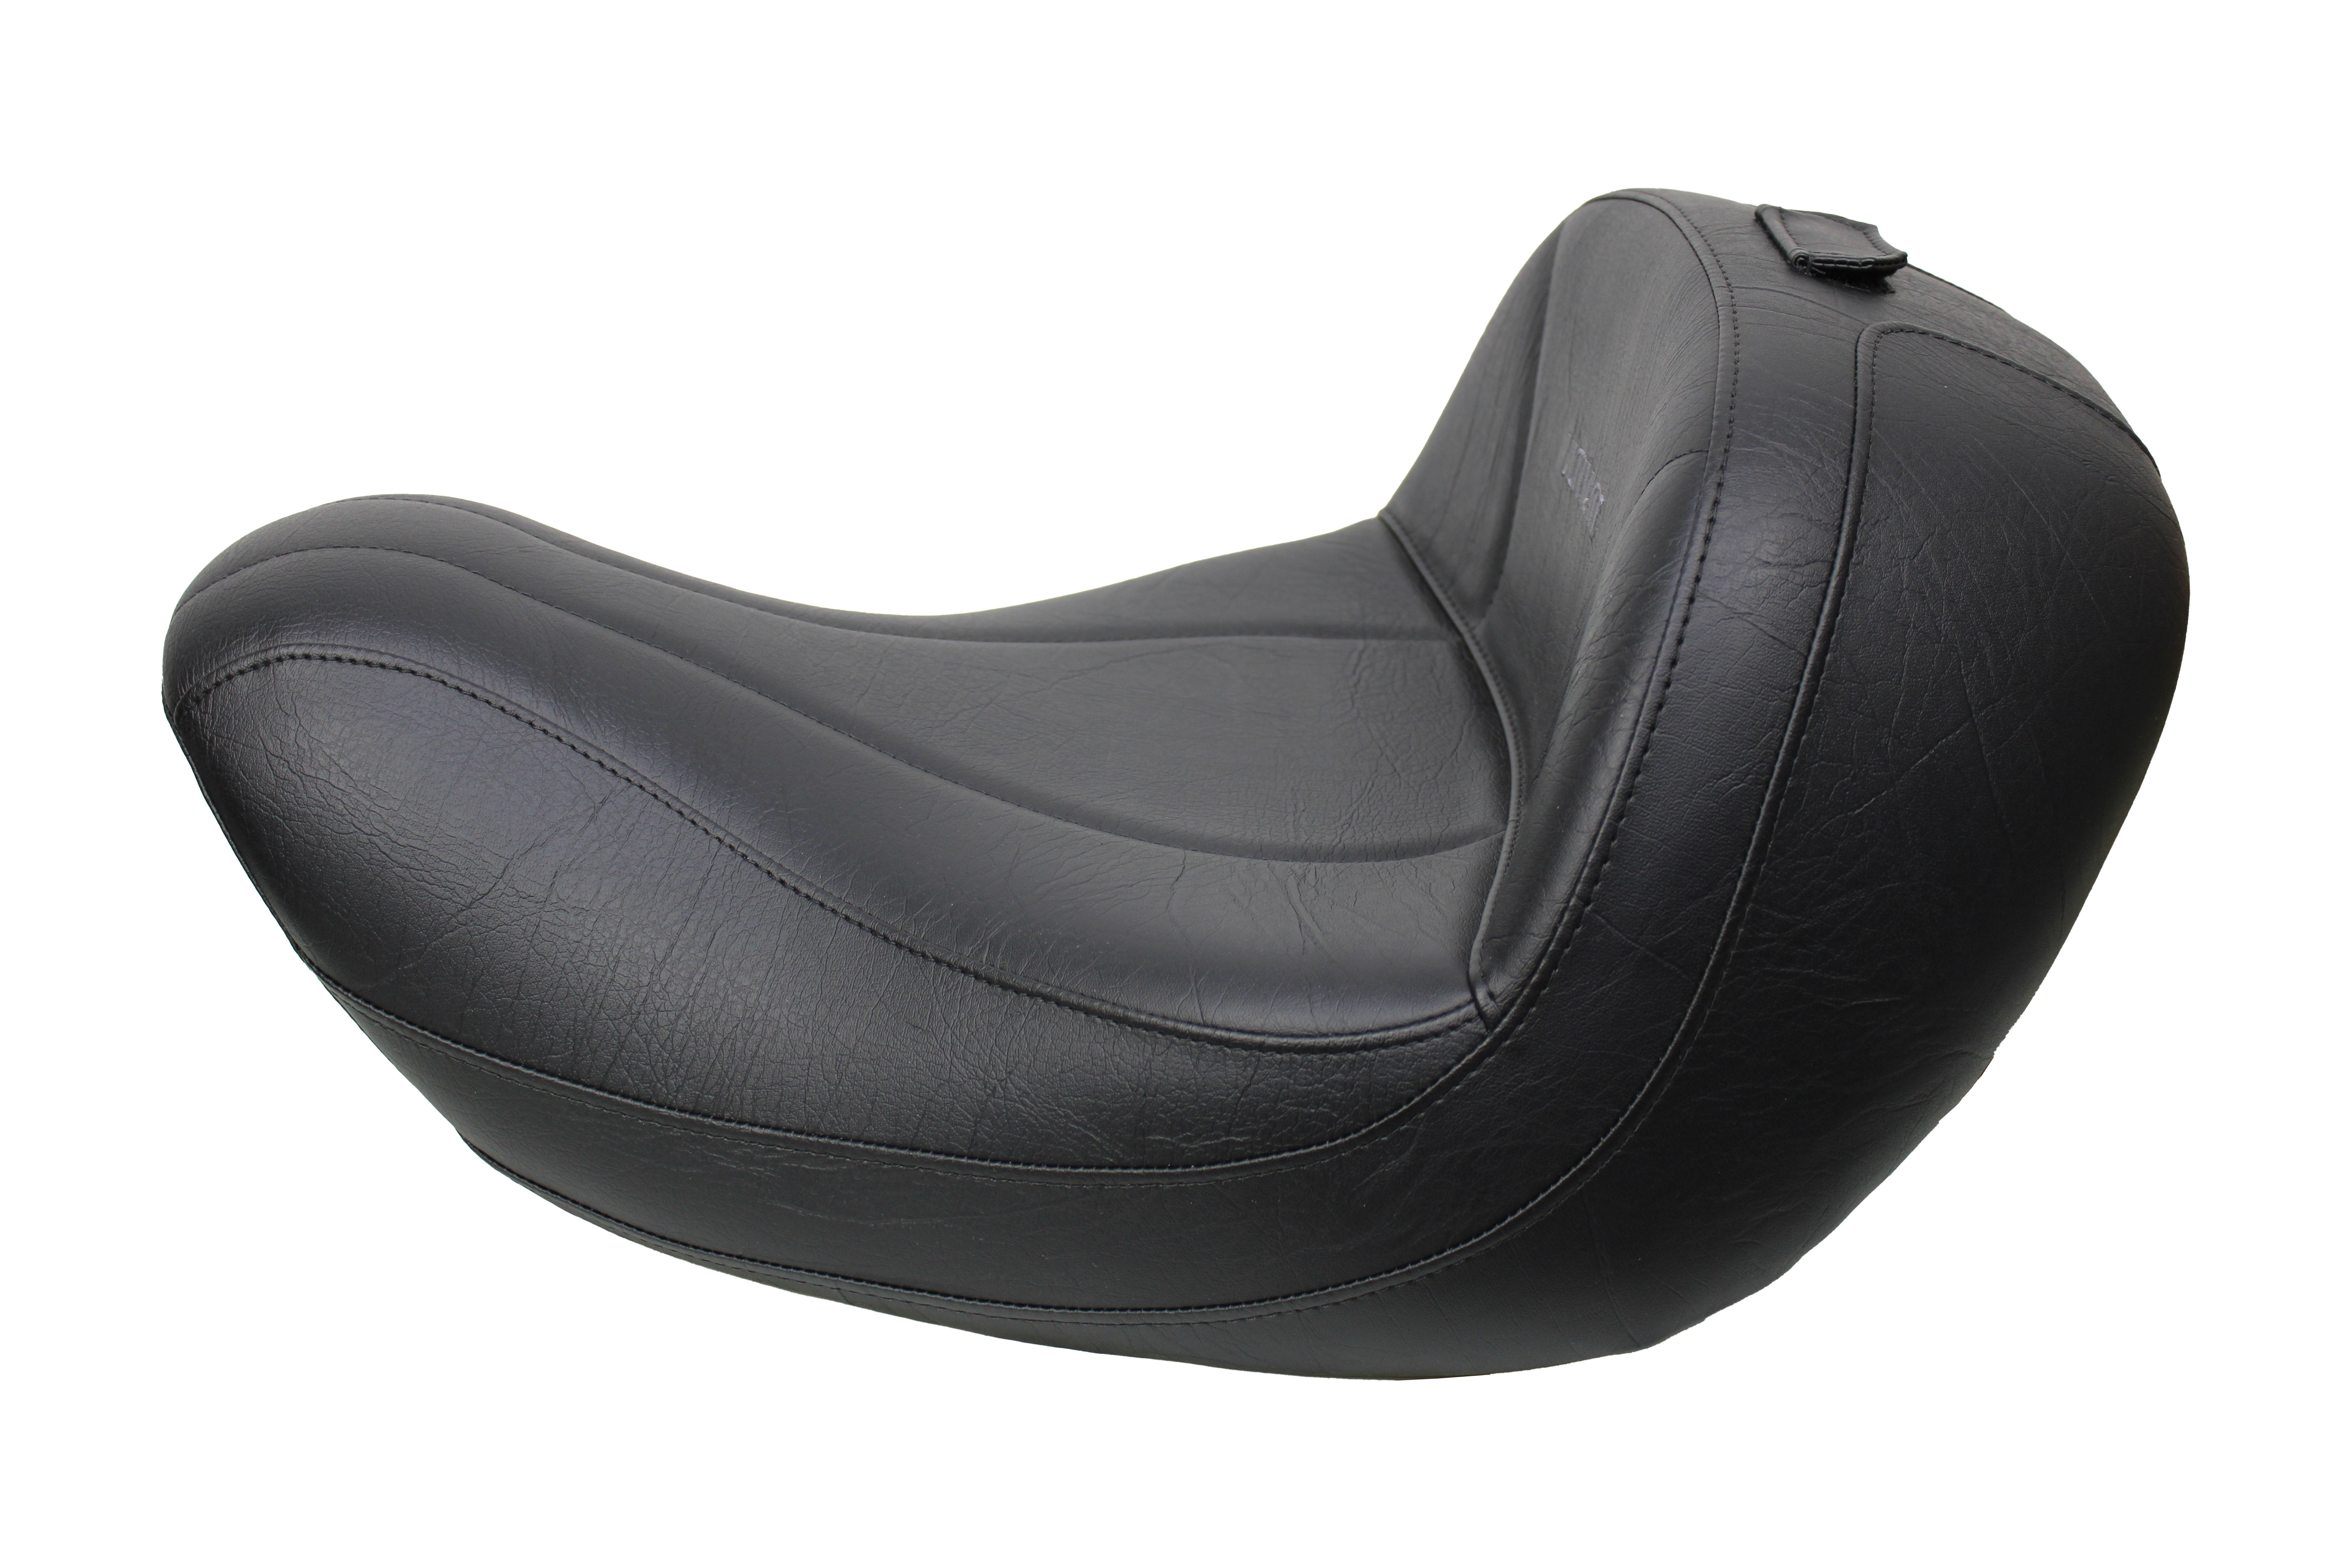 Valkyrie Interstate Lowrider Seat - Plain or Studded - (1999 - 2001)